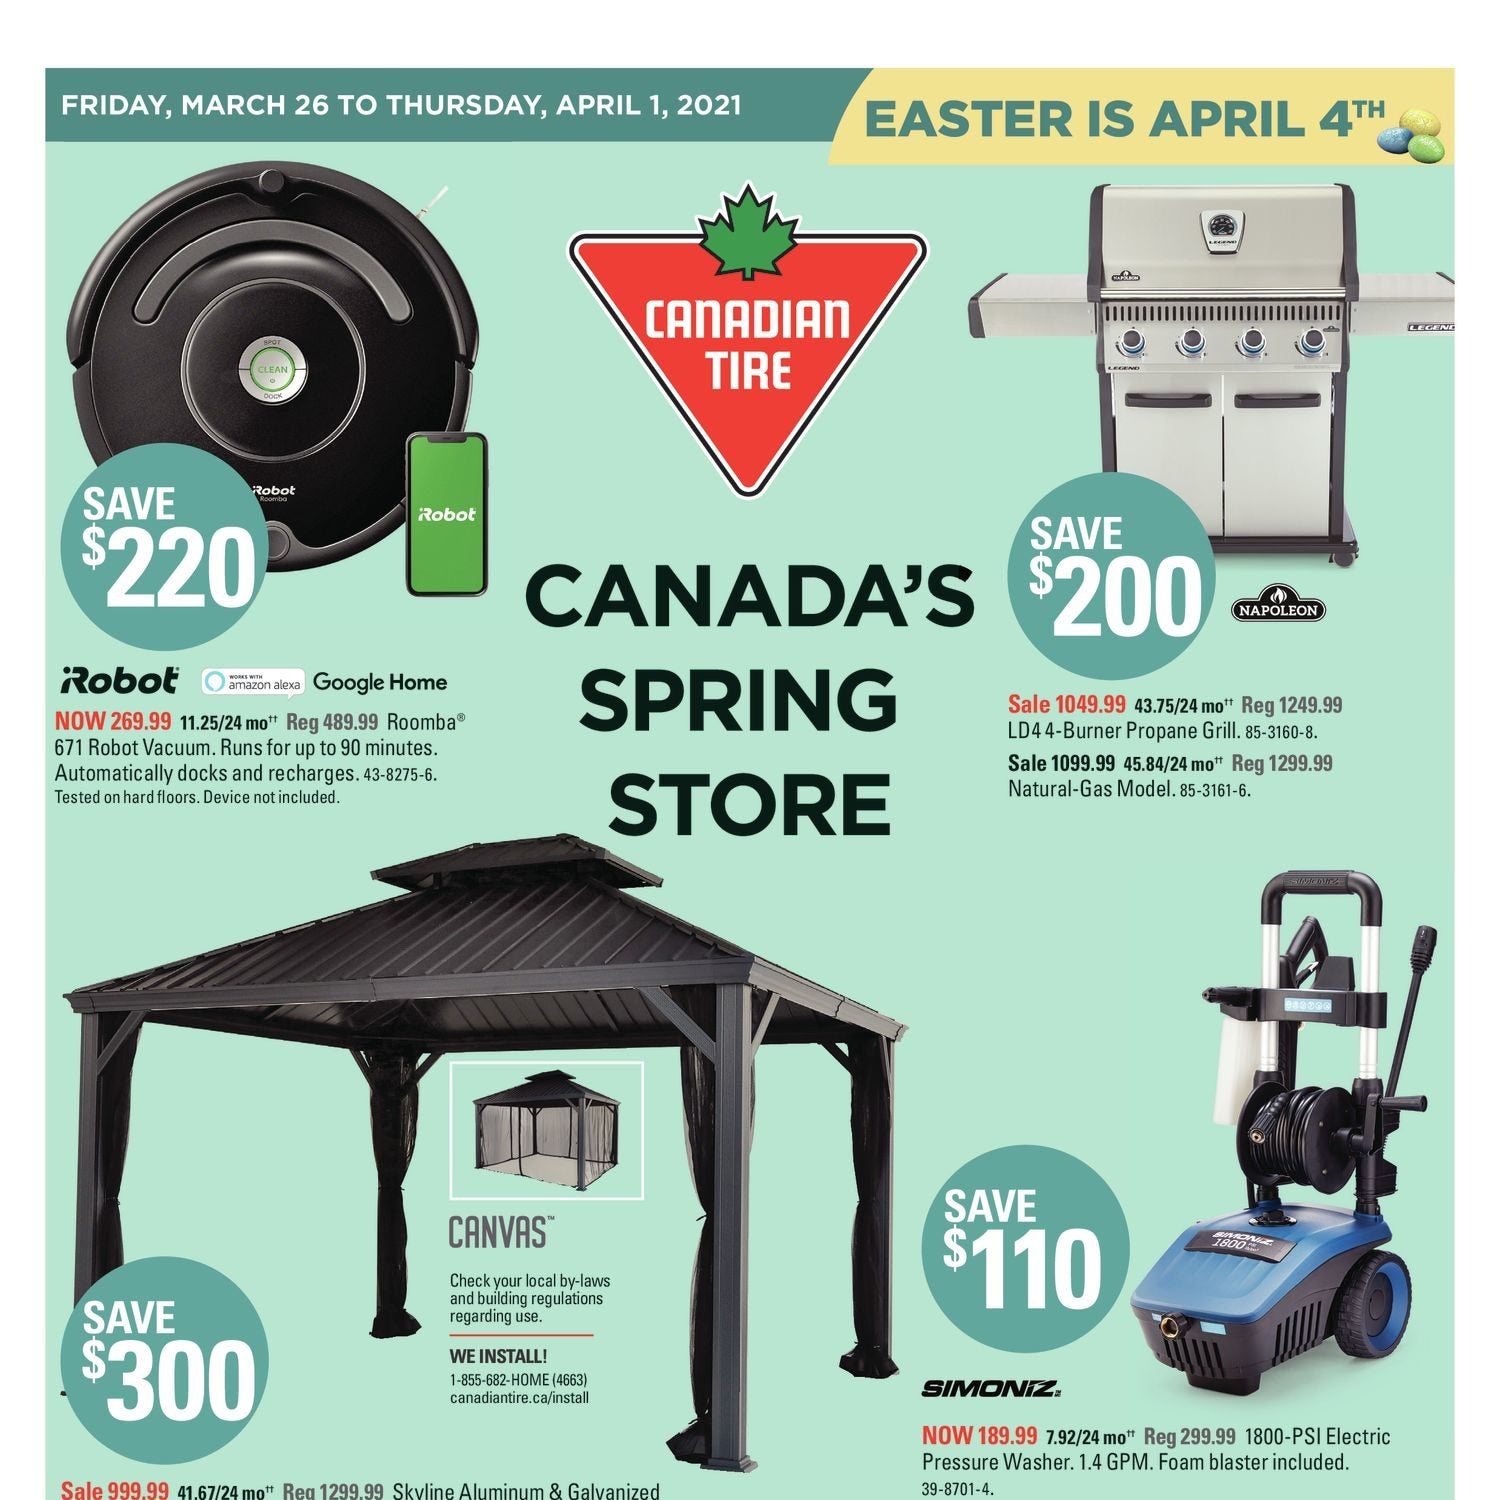 Canadian Tire Weekly Flyer Weekly Canada S Spring Store Mar 26 Apr 1 Redflagdeals Com